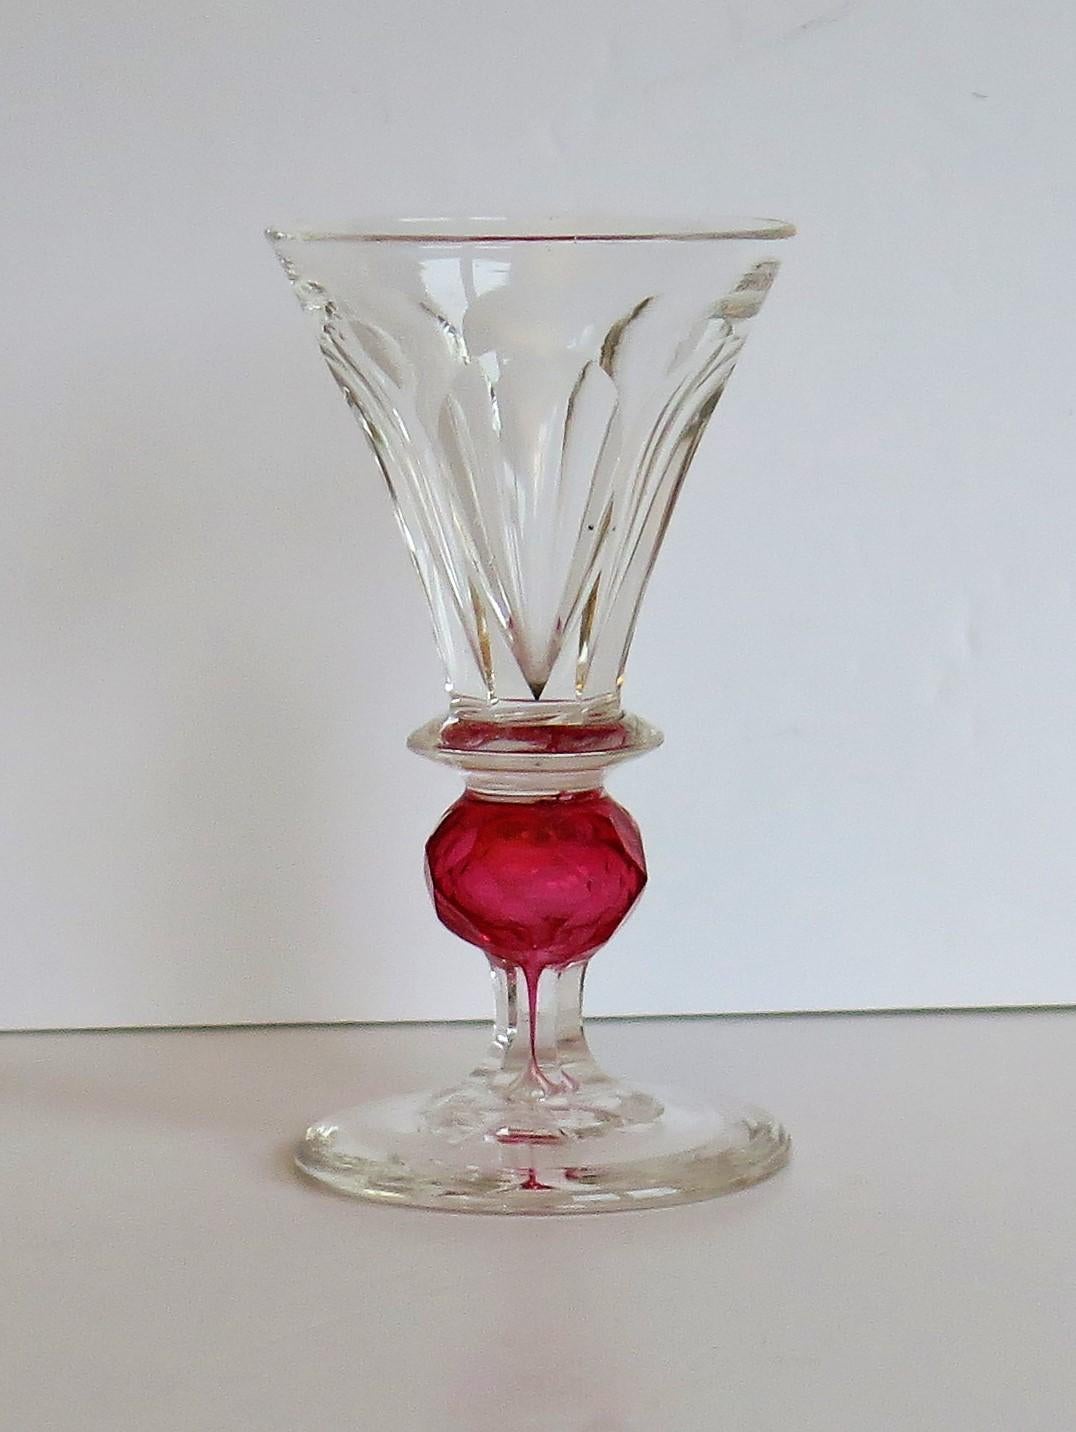 This is a rare hand blown drinking glass with a most unusual stem having a colored cranberry glass ball knop and further cut detail, made in England during the mid Victorian period of the 19th century, circa 1860.

The glass is hand blown with a